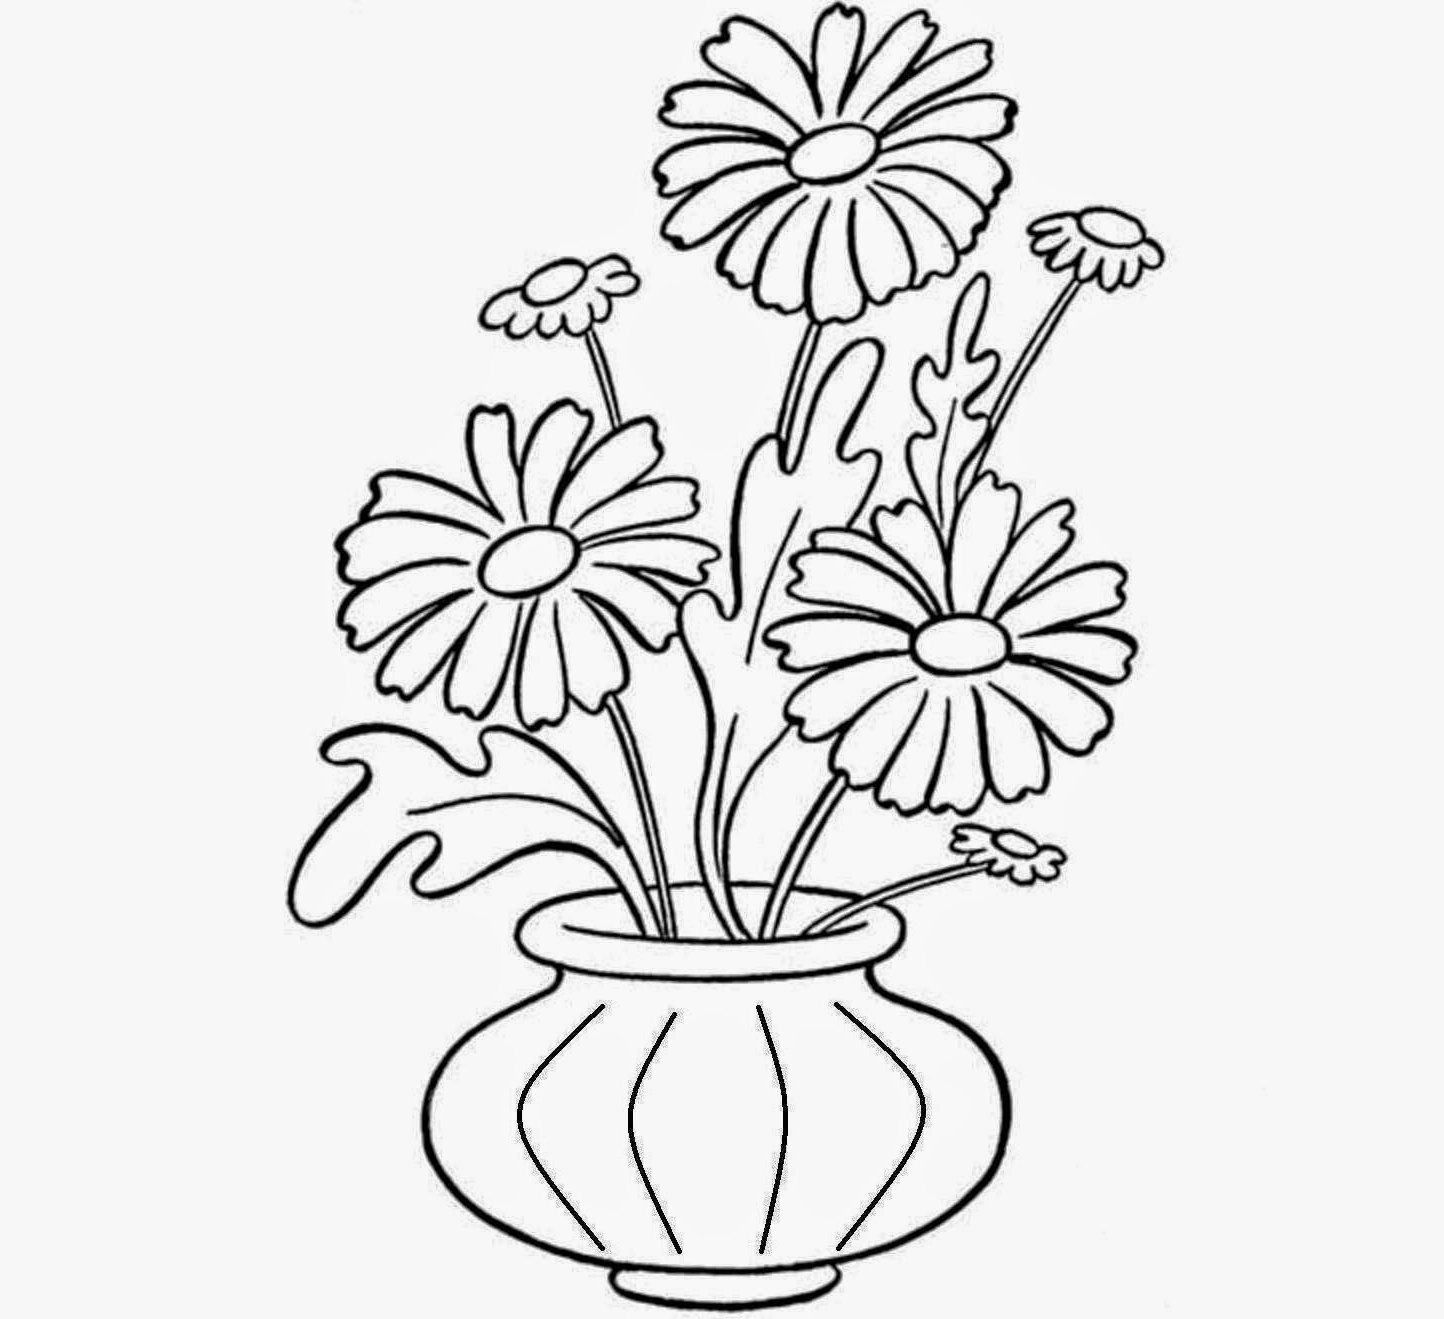 A Beautiful Flower Pot Drawing : How to draw flowers with vase ...